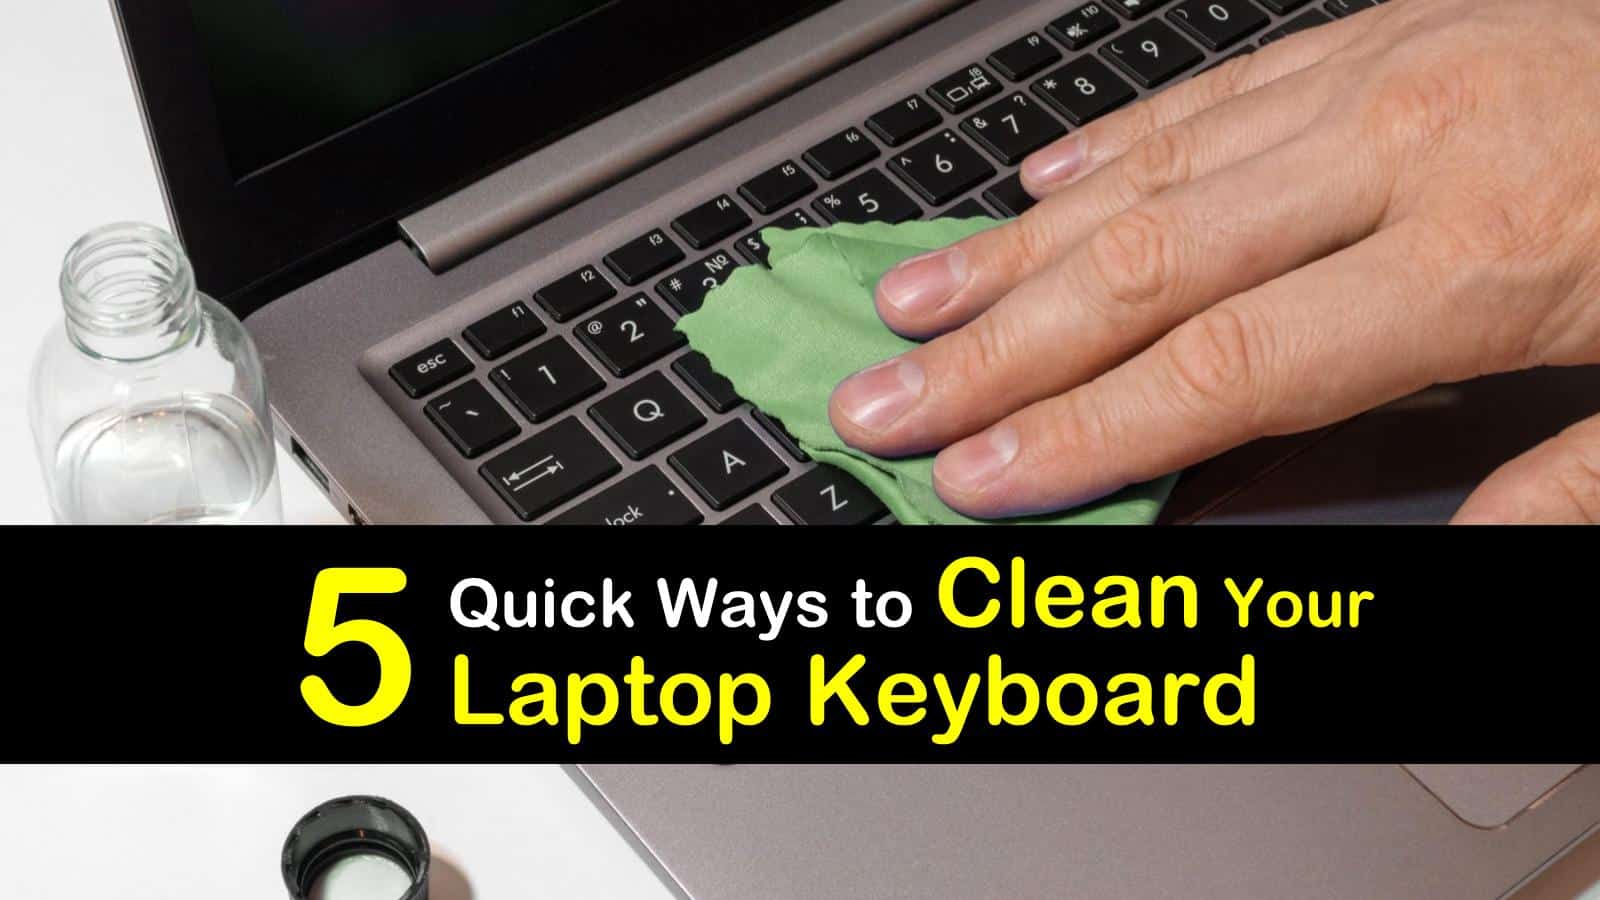 5 Quick Ways to Clean Your Laptop Keyboard